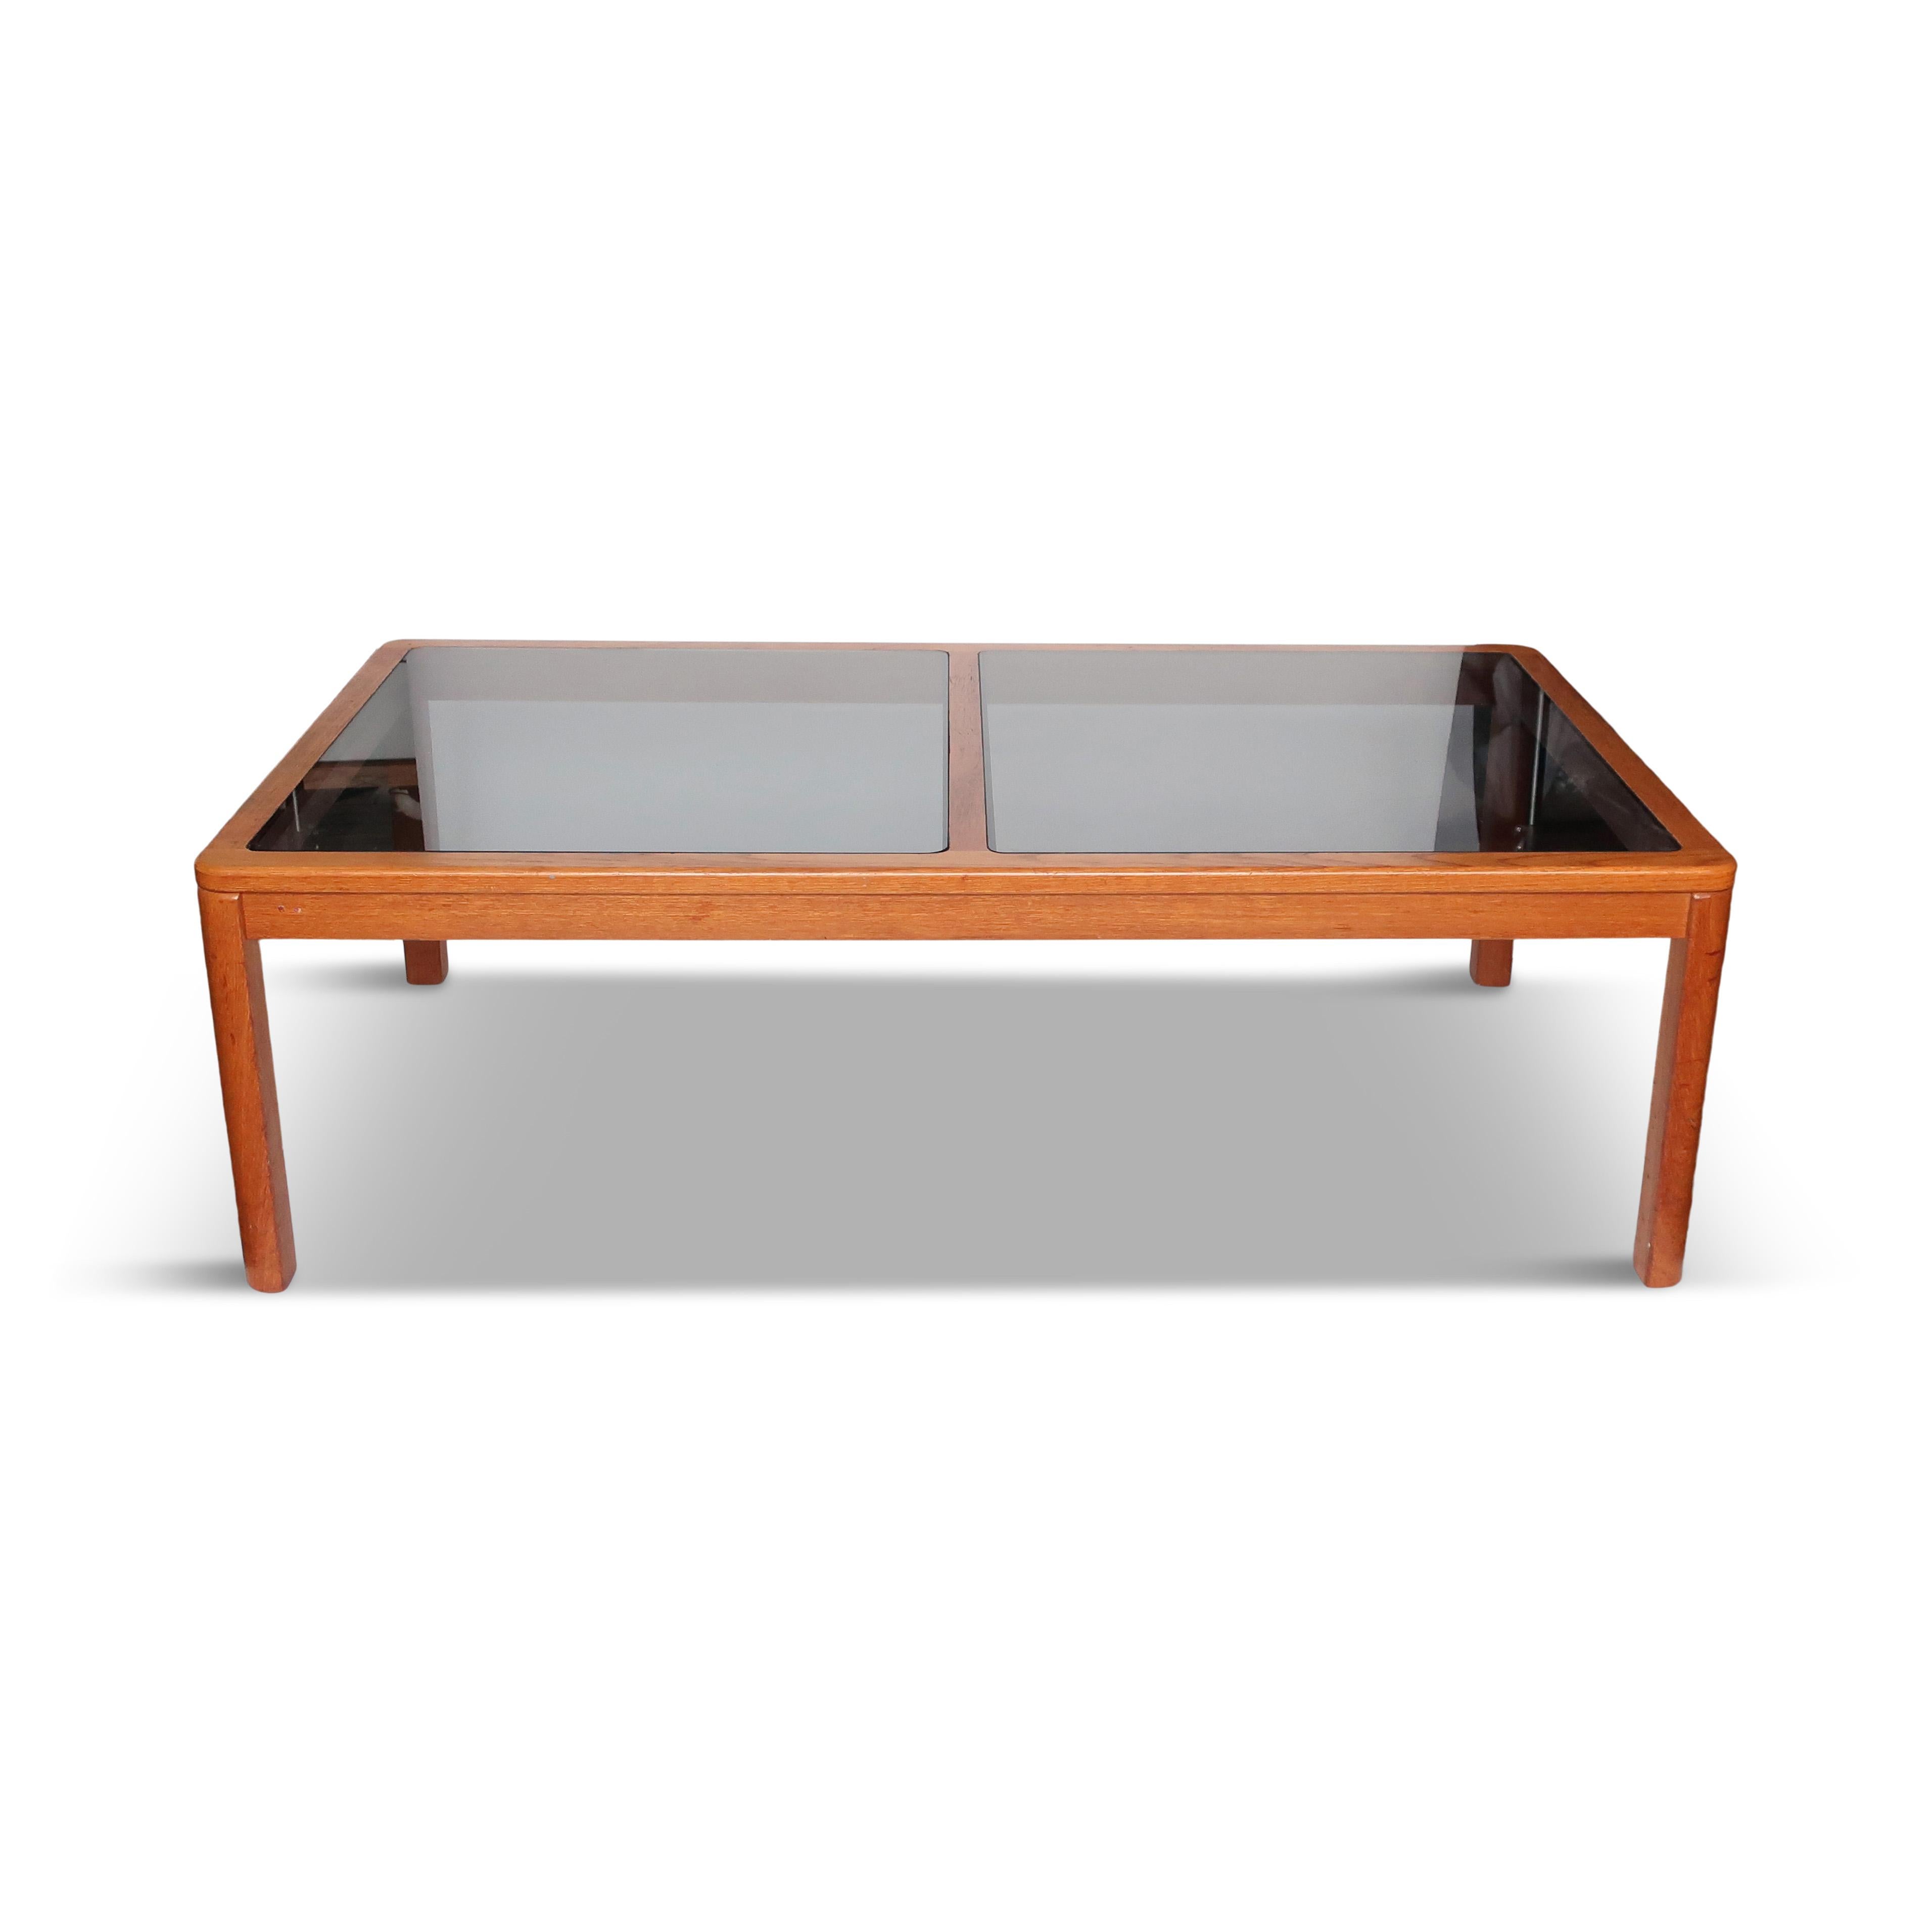 Lovely Mid-Century Modern teak and smoked glass coffee table by Danish furniture manufacturer Uldum Mobelfabrik. Solid teak frame with rounded corners that soften the table's feel and two pieces of smoked glass inset to form the table top. Sleek and